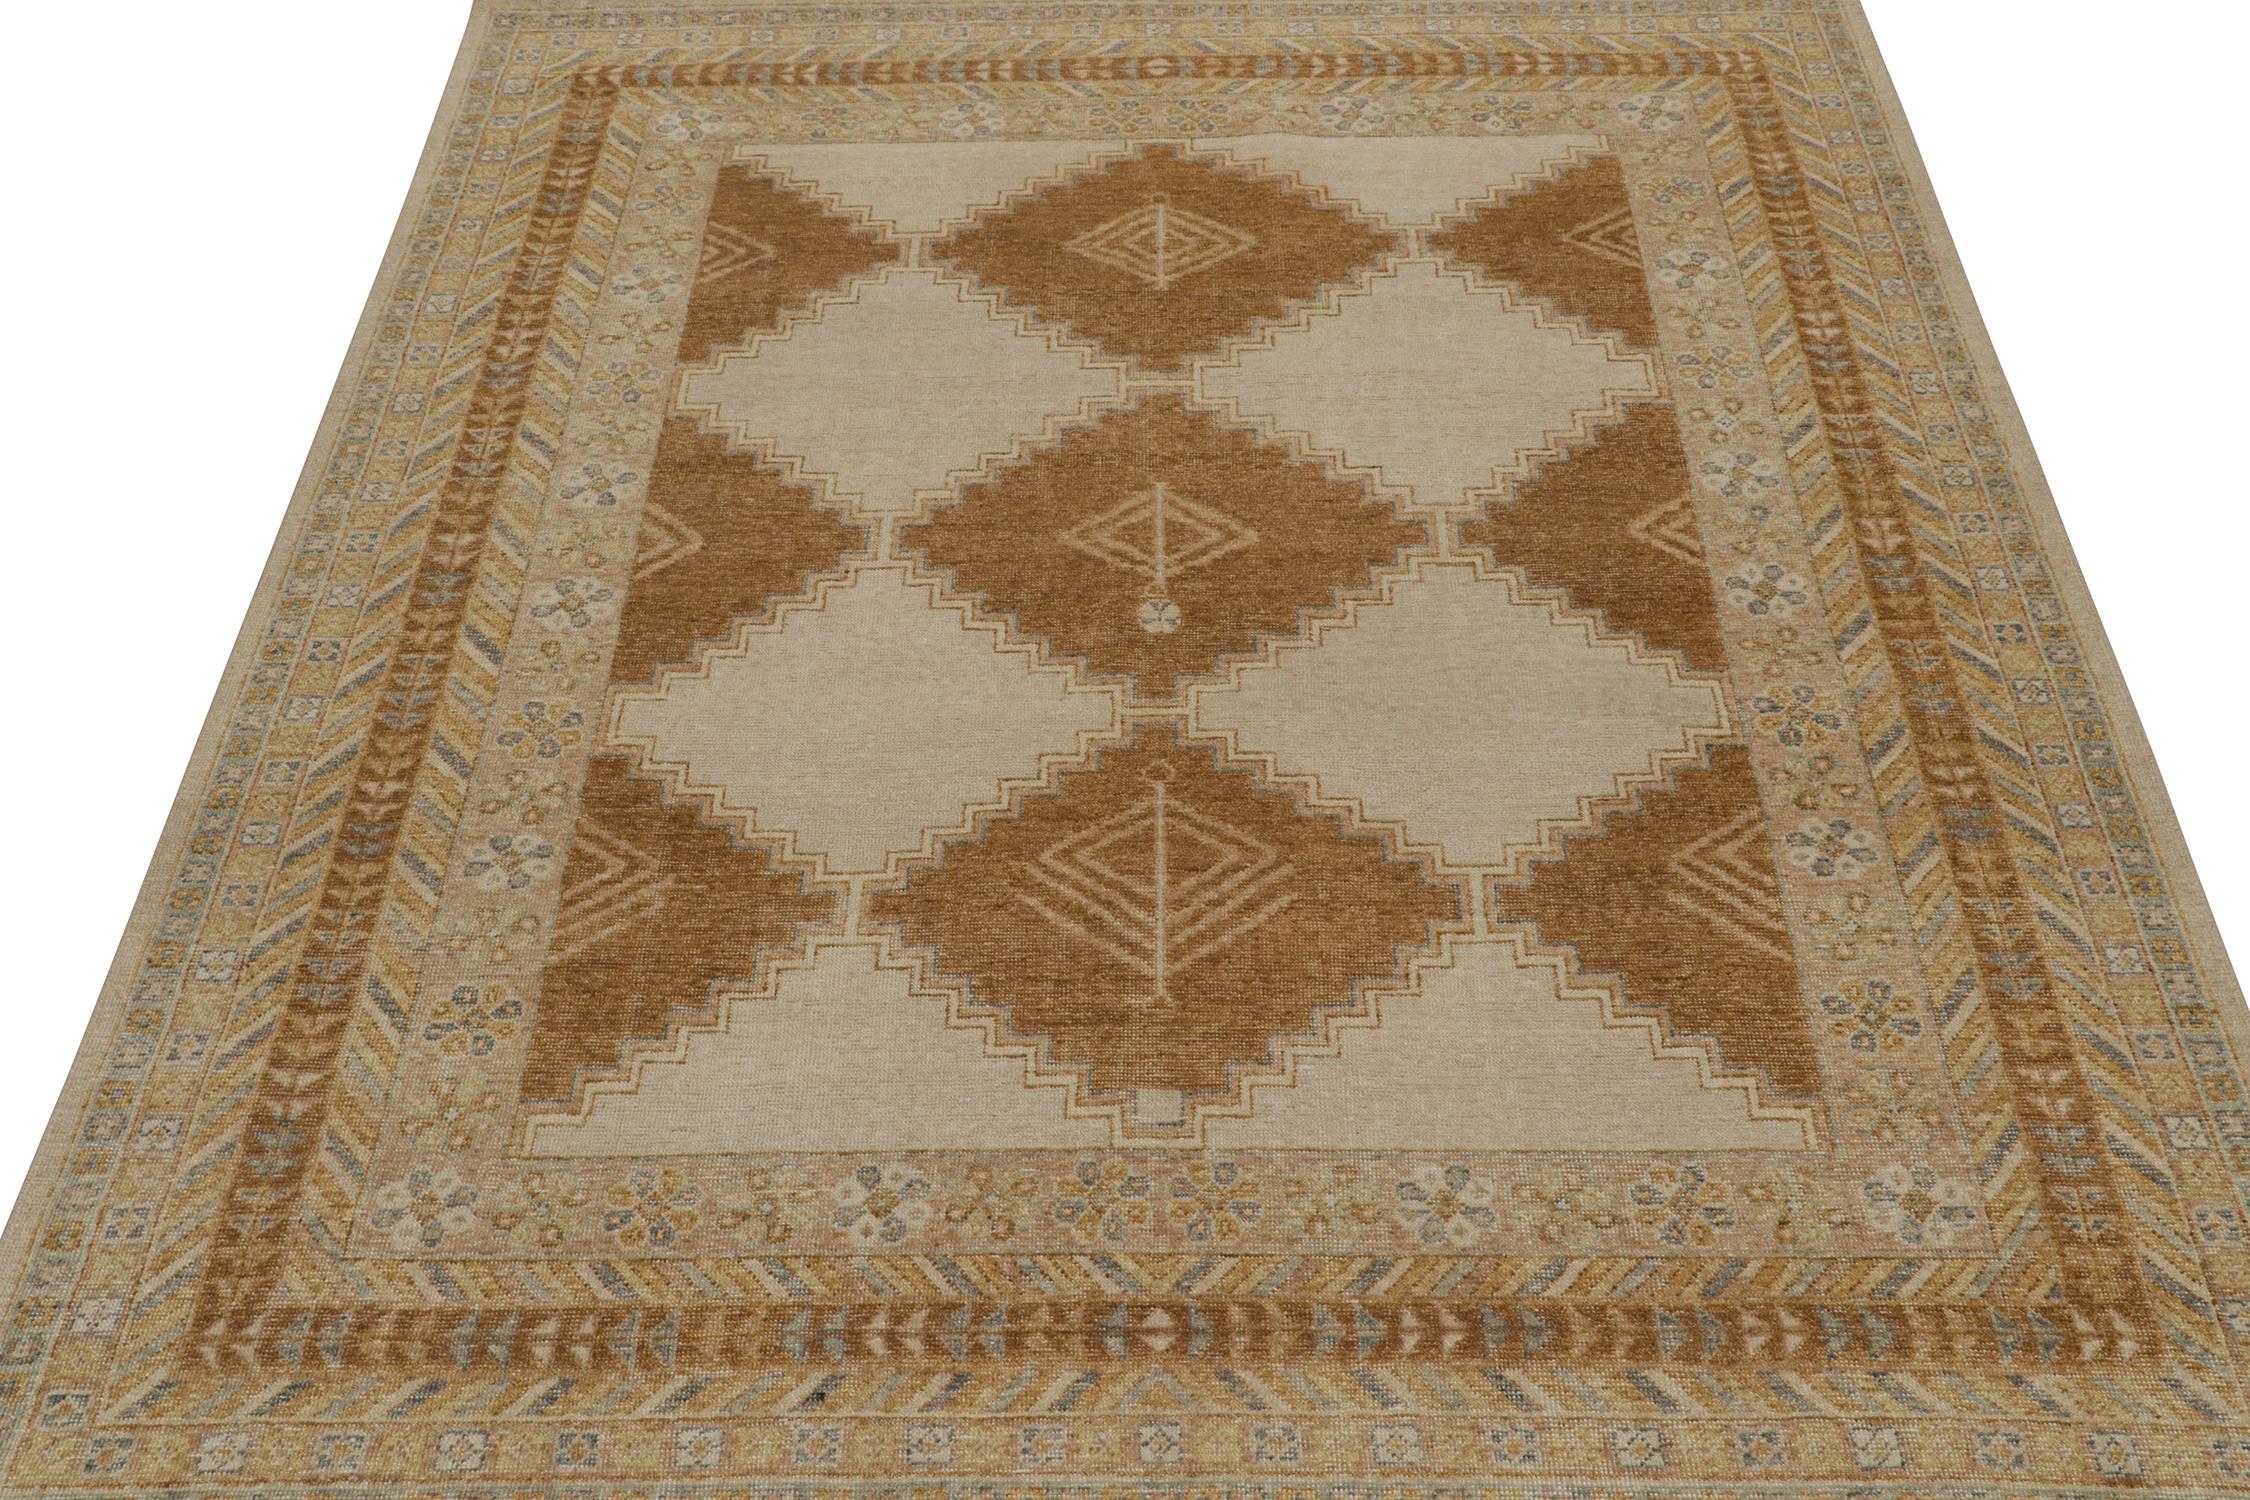 This 8x10 rug is a new addition to Rug & Kilim’s Homage Collection. Hand-knotted in wool and cotton, it recaptures an antique tribal rug pattern in a new take on distressed texture.

On the Design:

One can’t help but admire the balance of warm and